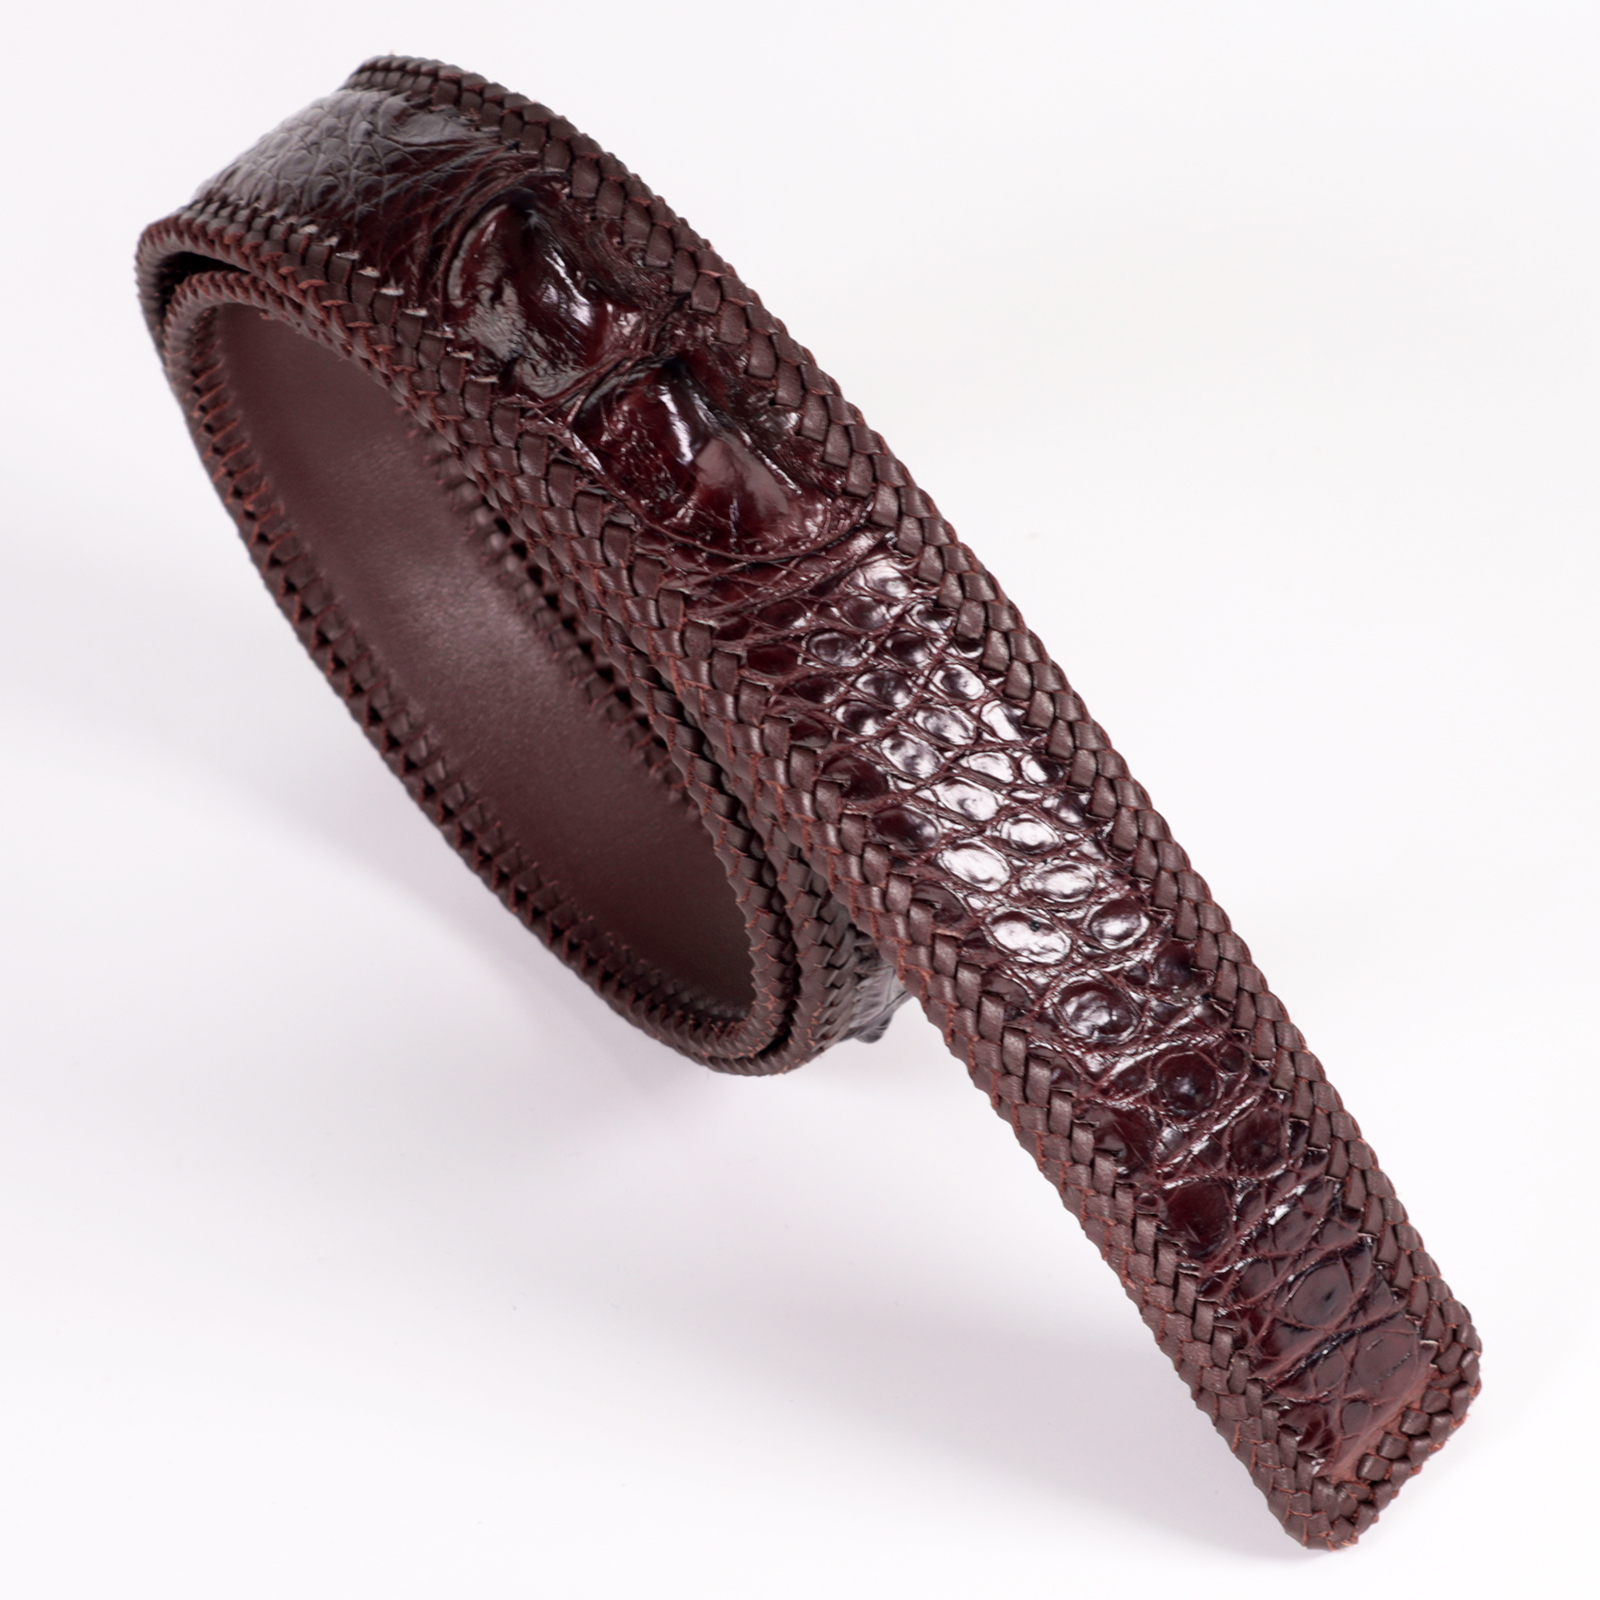 Sophisticated Men's Genuine Crocodile Dress Belt - Timeless and Stylish- Without Buckle